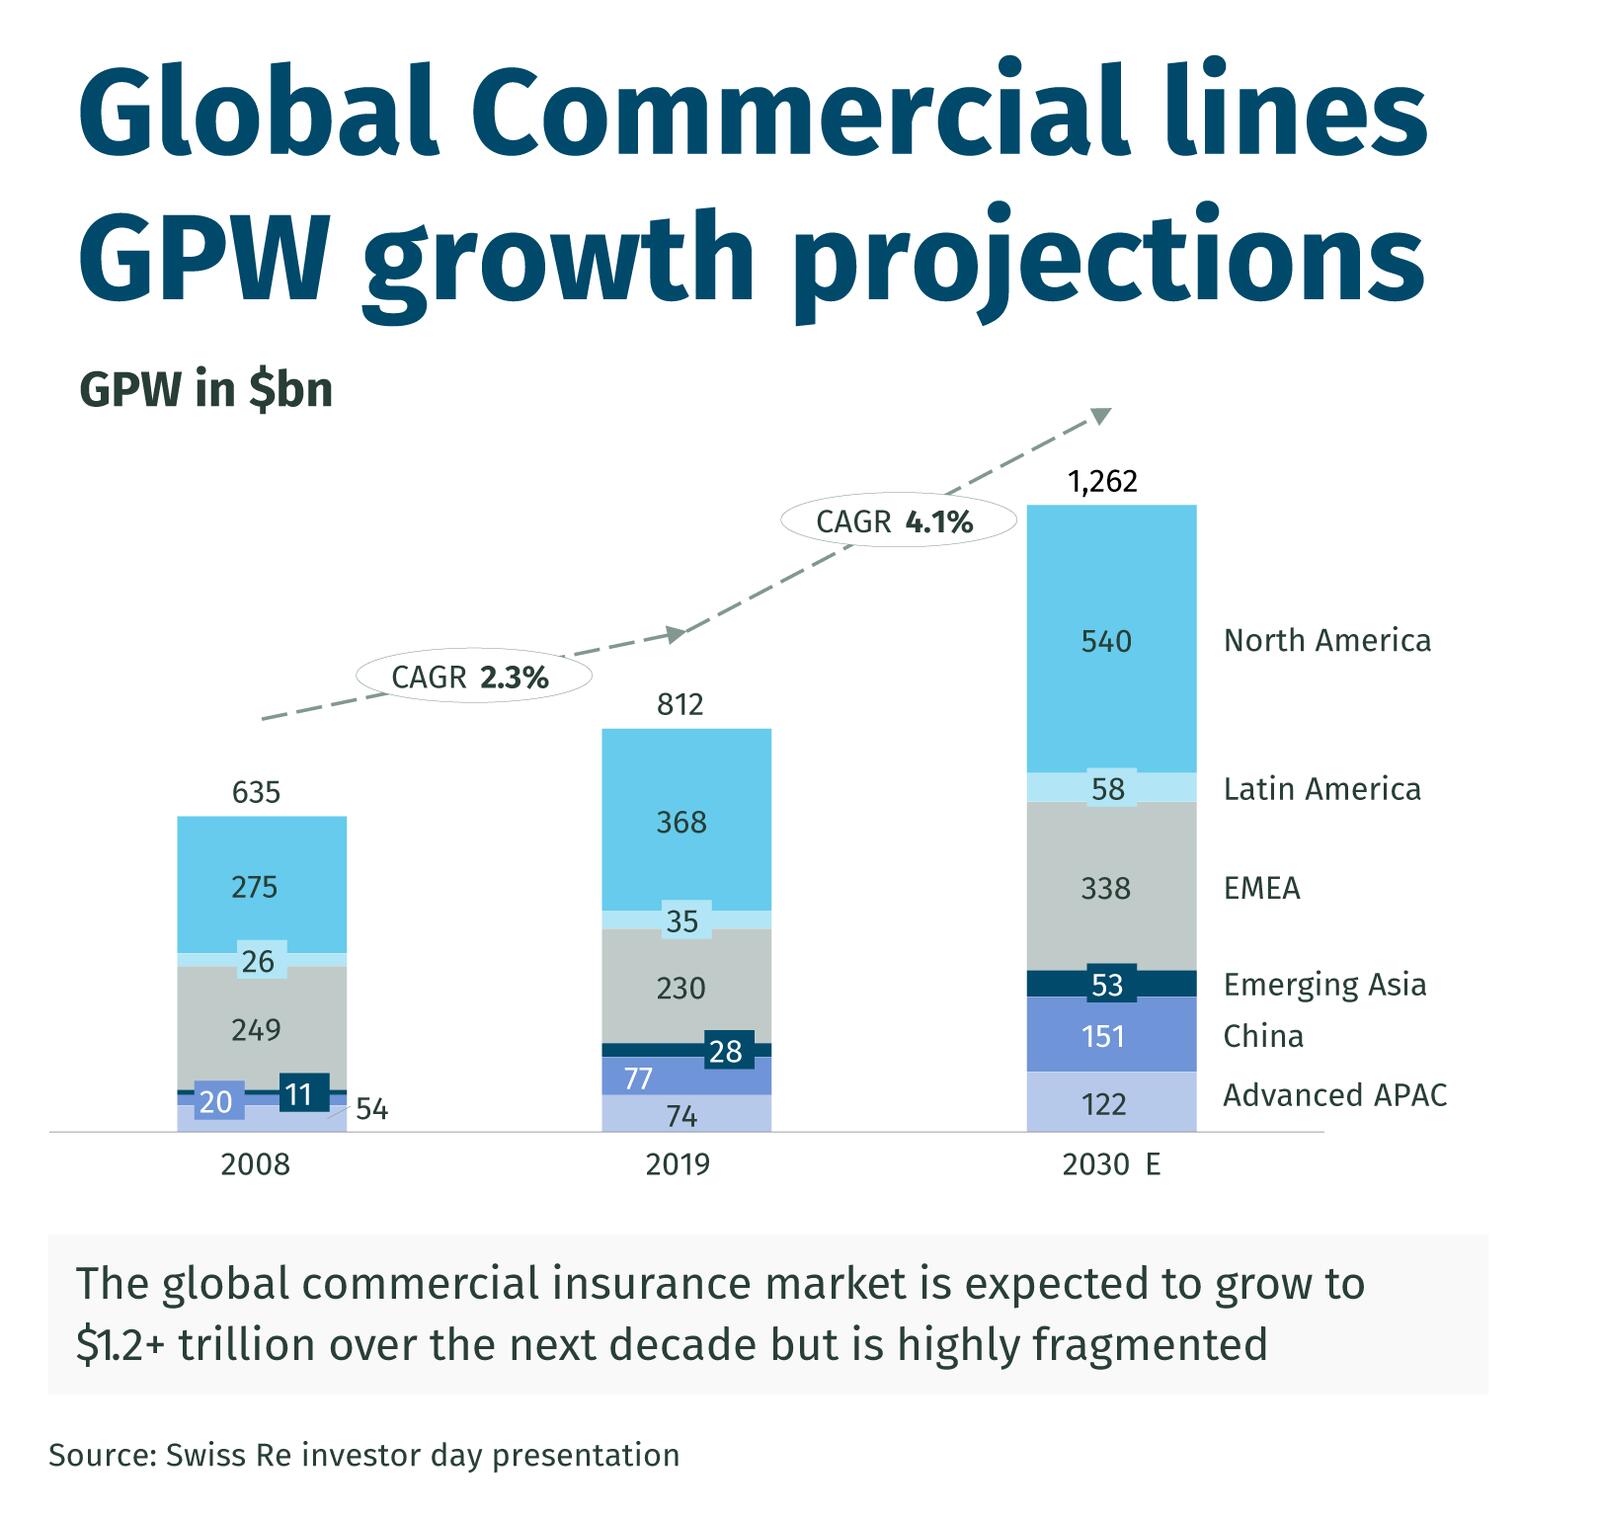 Global Commercial linesGPW growth projections